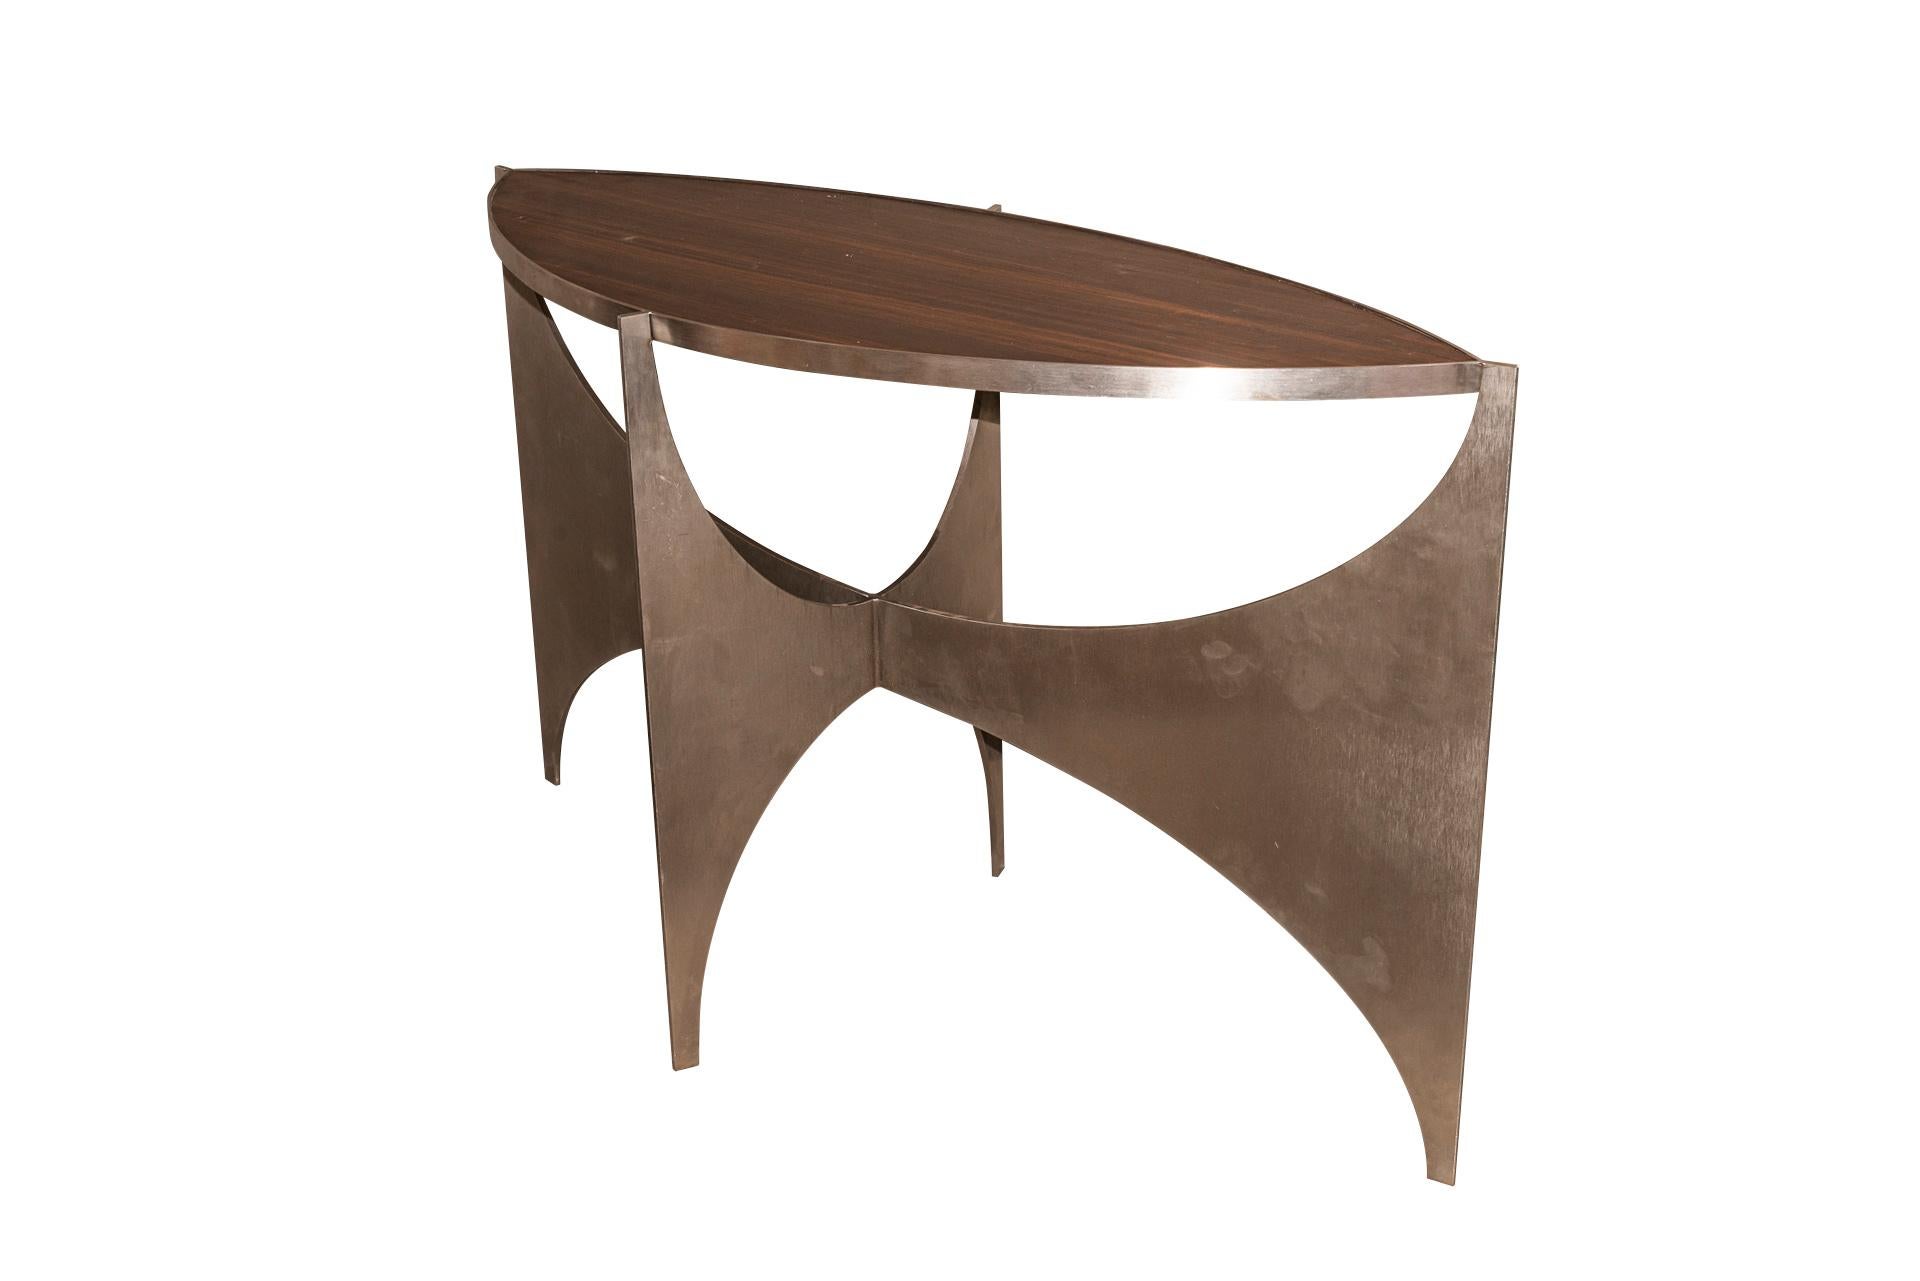 In the style of Philippe Hiquily, Console,
Aluminum and wood tabletop,
France, circa 1970.

Measures: Width 120 cm, Depth 50 cm, Height 73 cm.

Philippe Hiquily was a French sculptor and designer, who trained as a sculptor at the École des